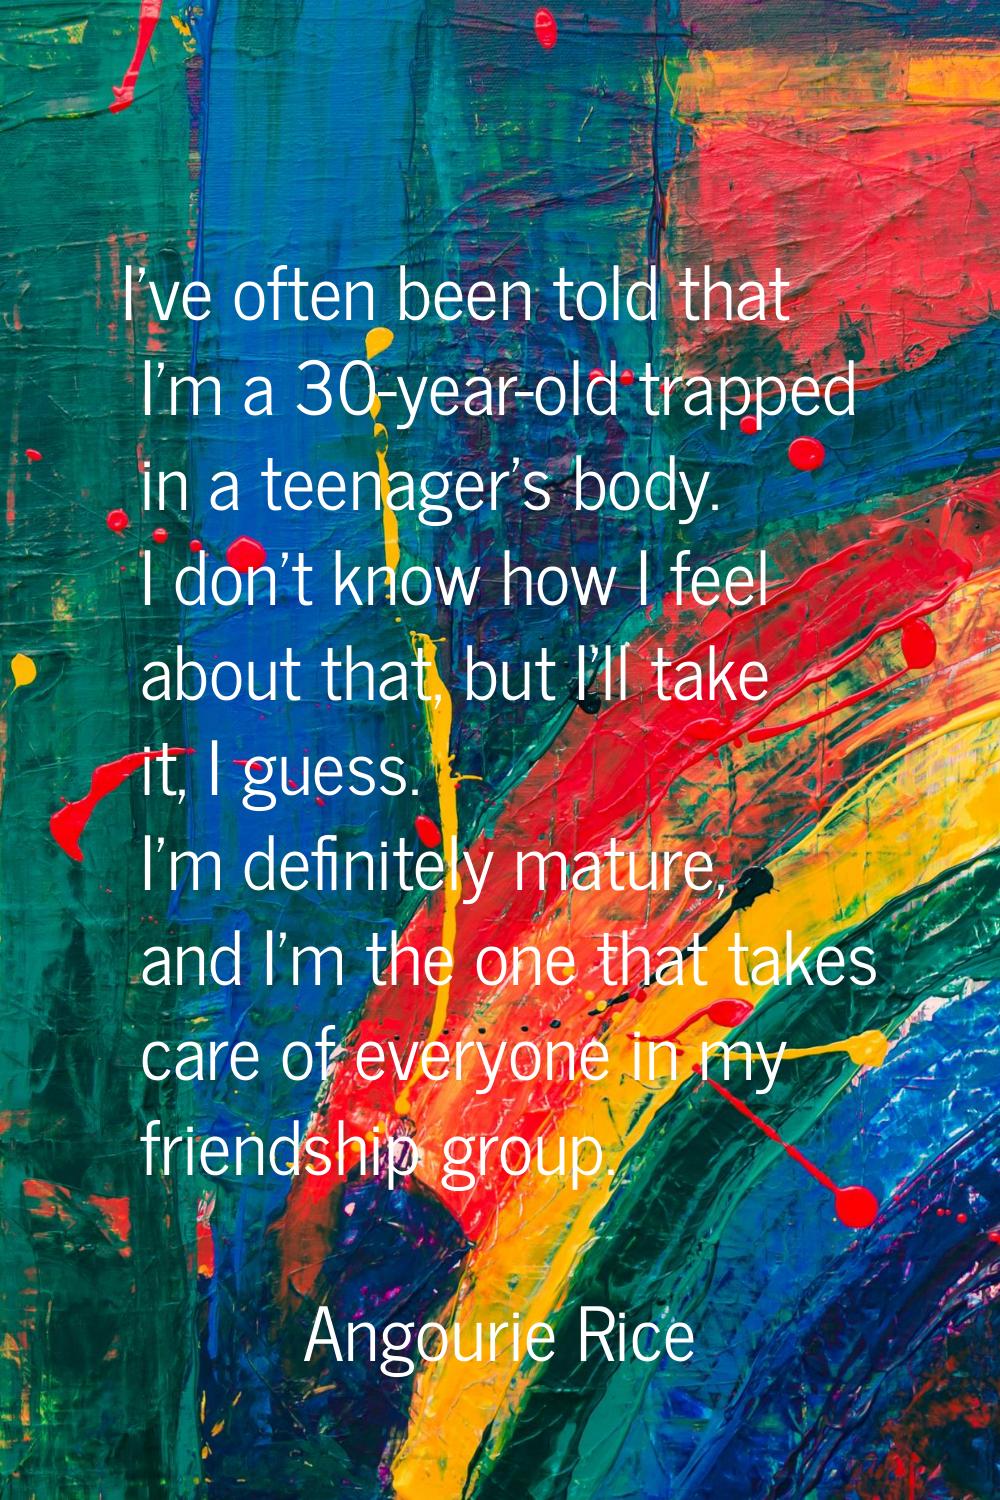 I've often been told that I'm a 30-year-old trapped in a teenager's body. I don't know how I feel a